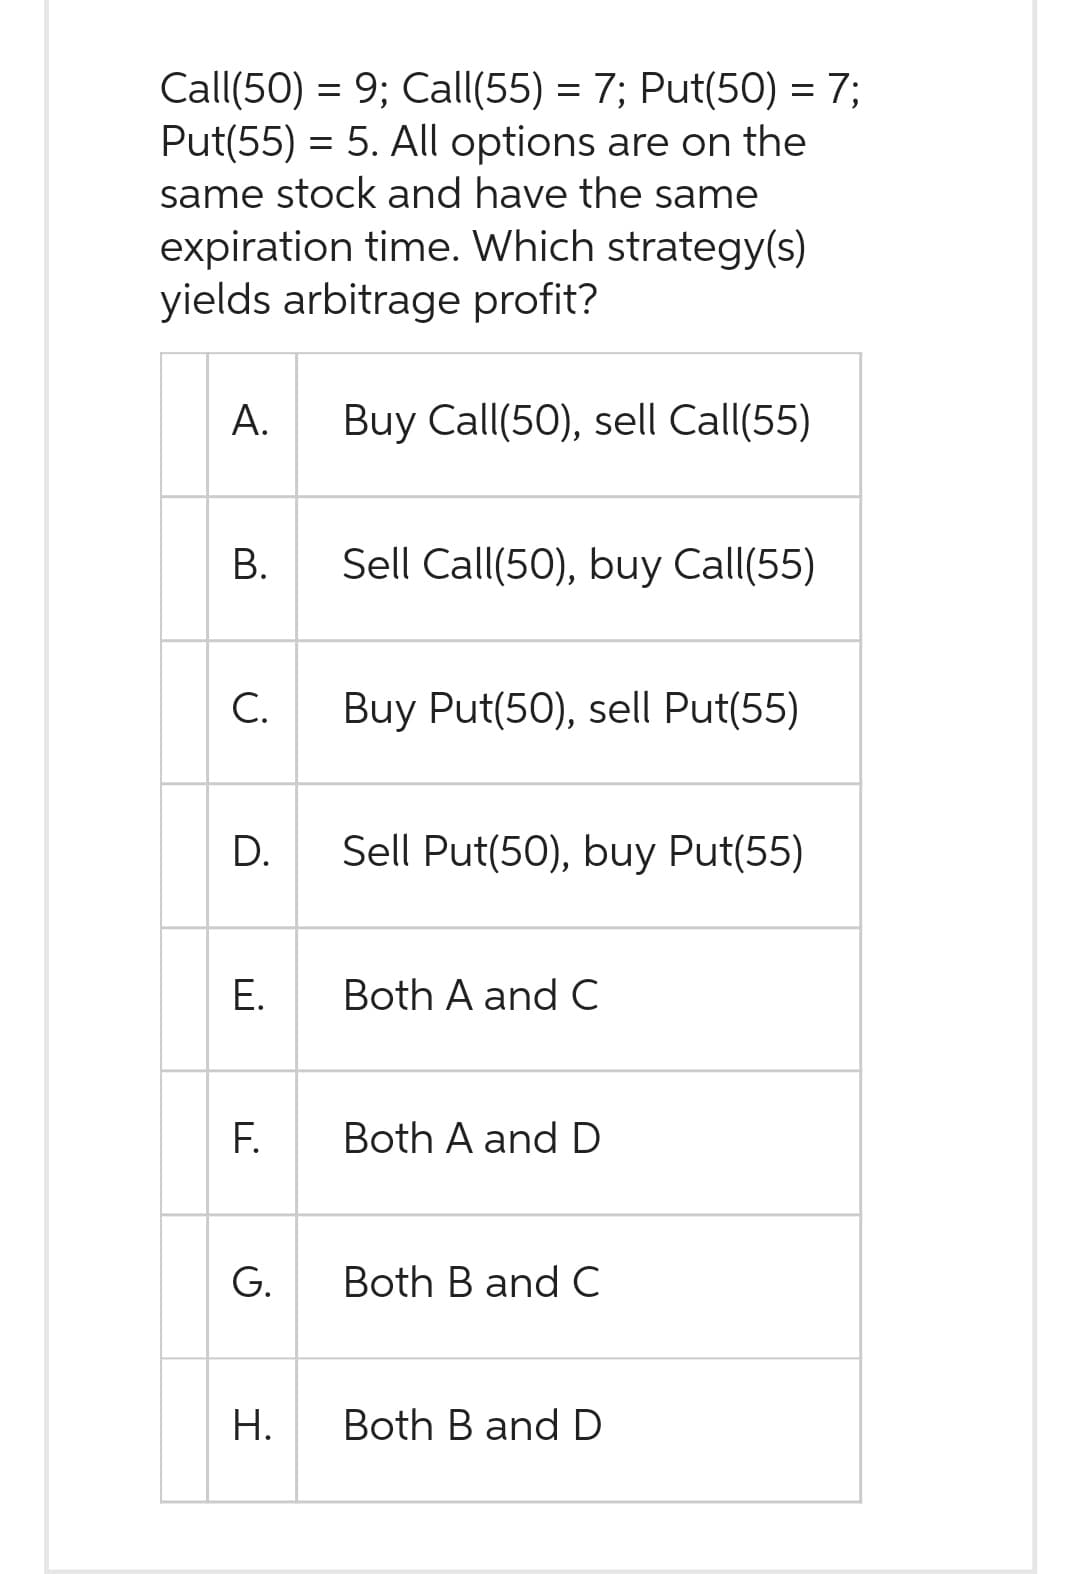 Call(50) = 9; Call(55) = 7; Put(50) = 7;
Put(55) = 5. All options are on the
same stock and have the same
expiration time. Which strategy(s)
yields arbitrage profit?
A.
B.
C.
D.
E.
F.
G.
H.
Buy Call(50), sell Call(55)
Sell Call(50), buy Call(55)
Buy Put(50), sell Put(55)
Sell Put(50), buy Put(55)
Both A and C
Both A and D
Both B and C
Both B and D